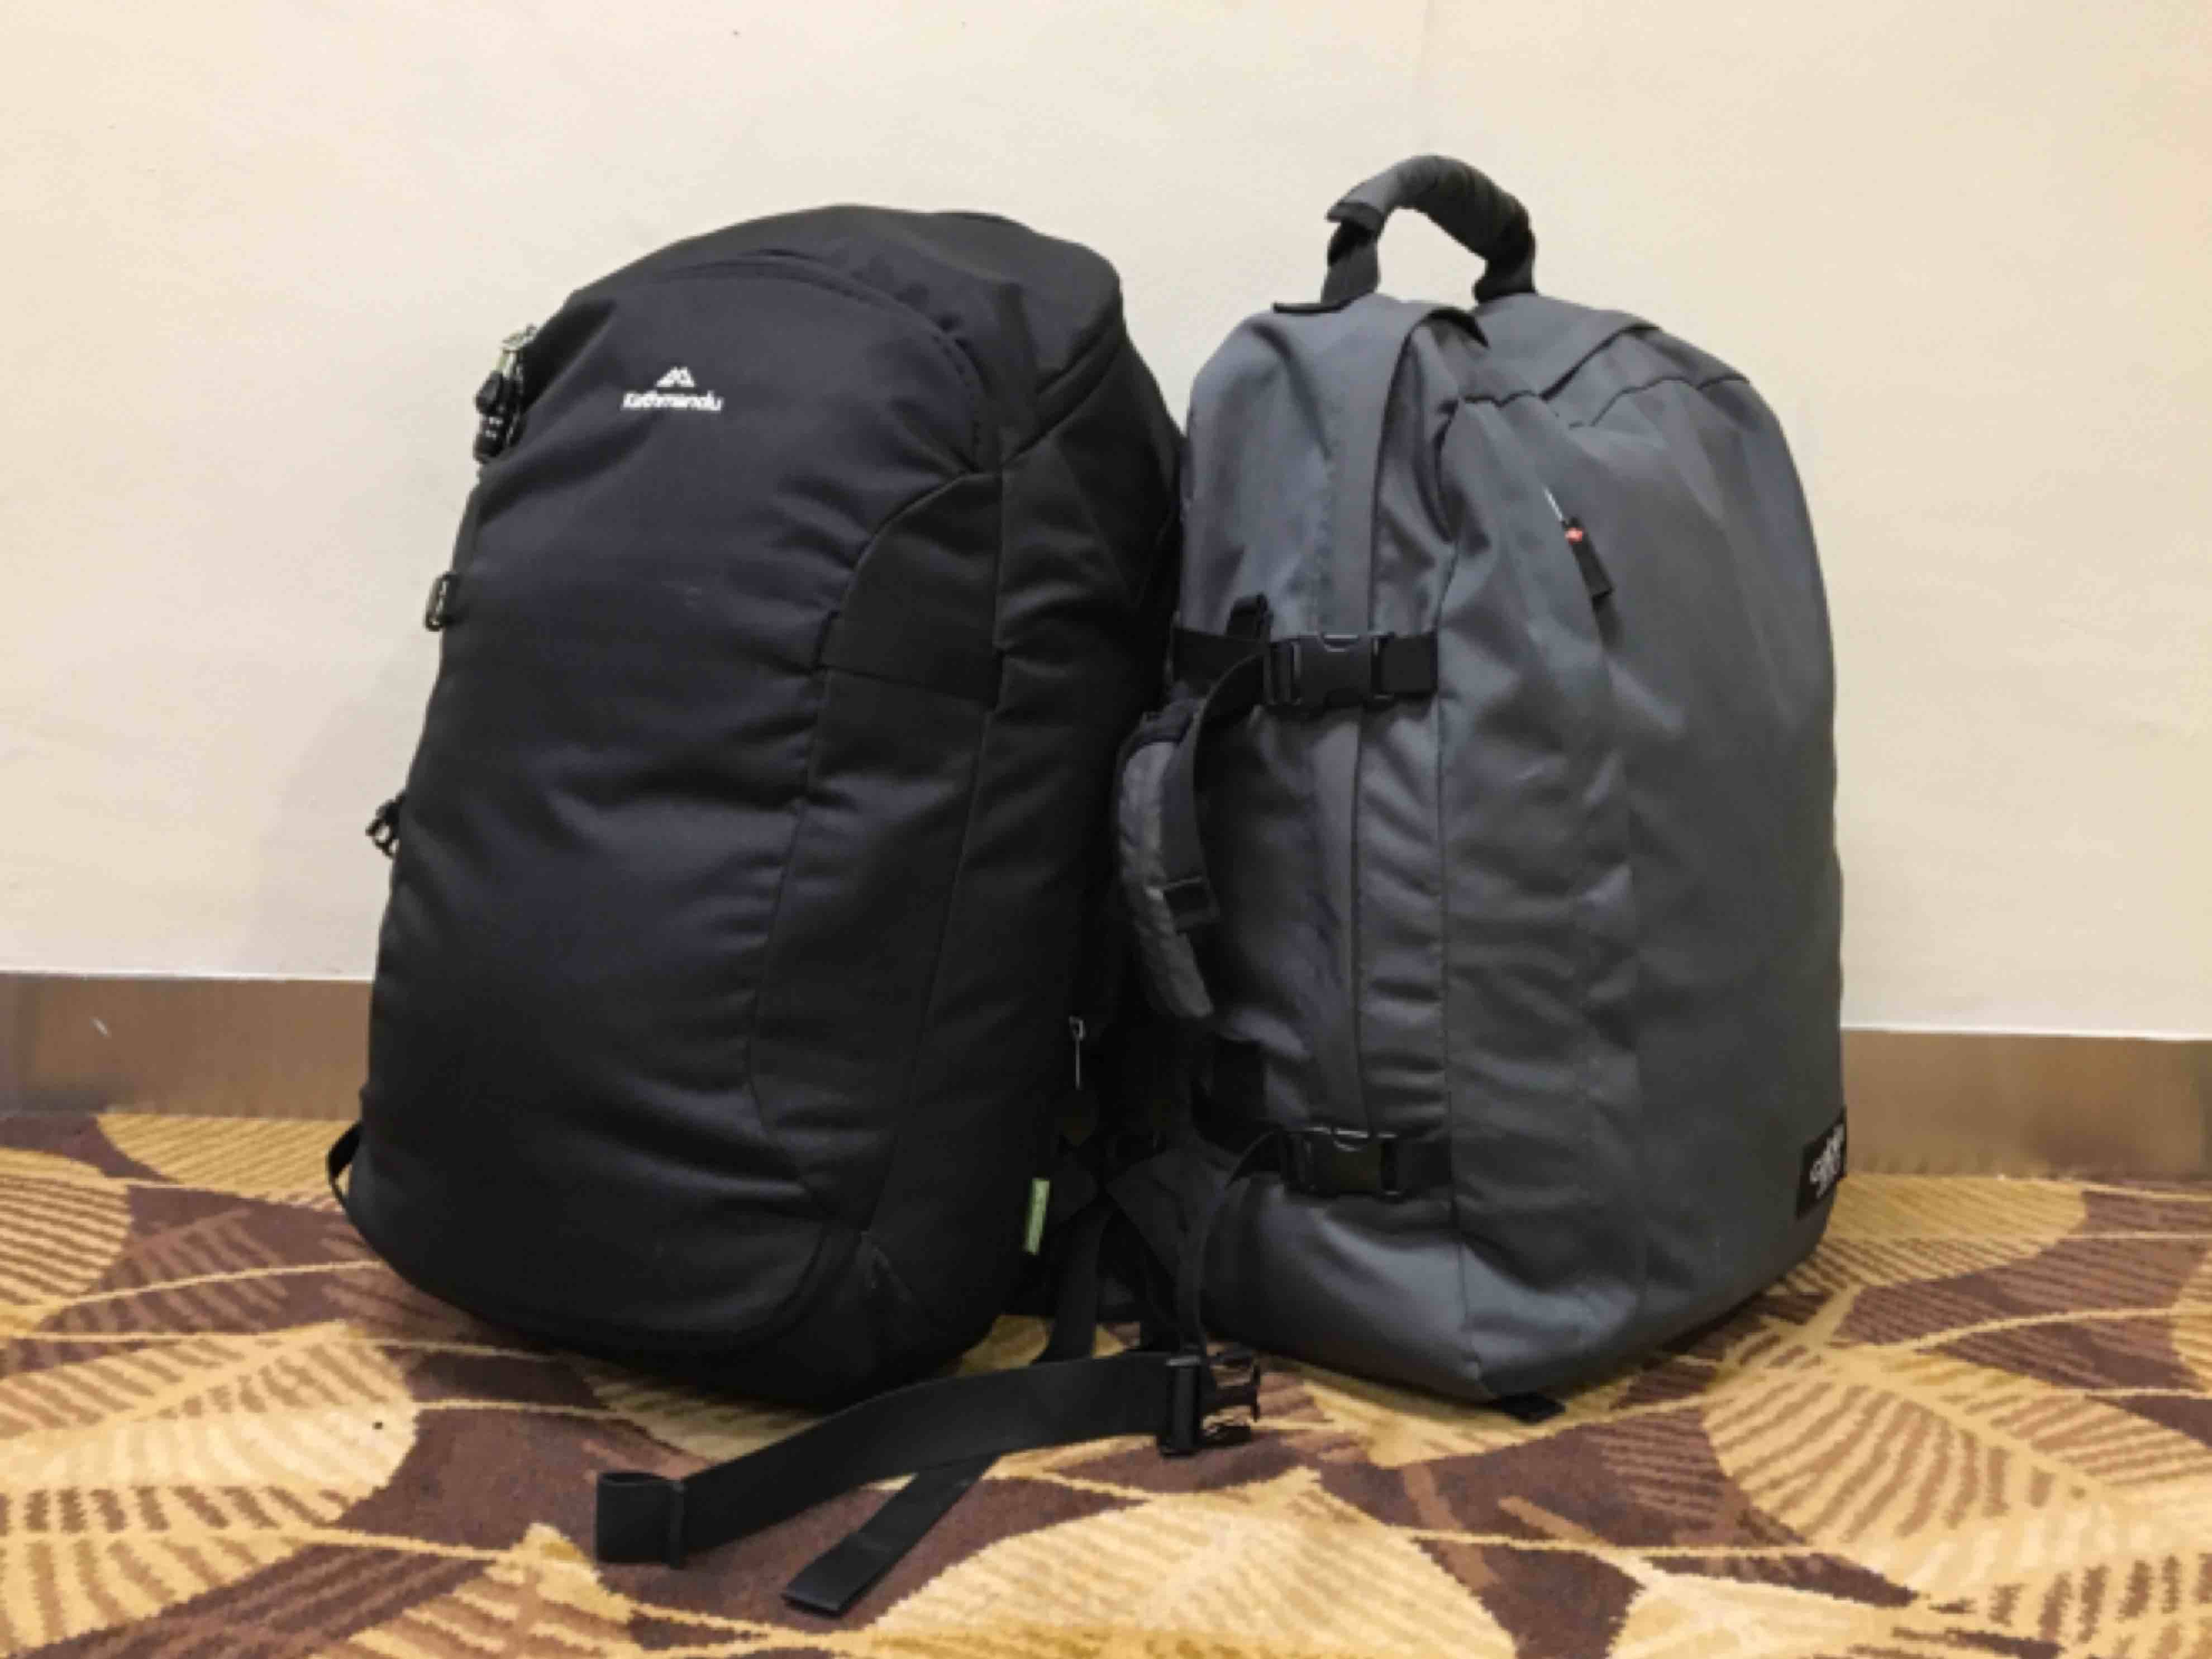 Our larger carry-on bags